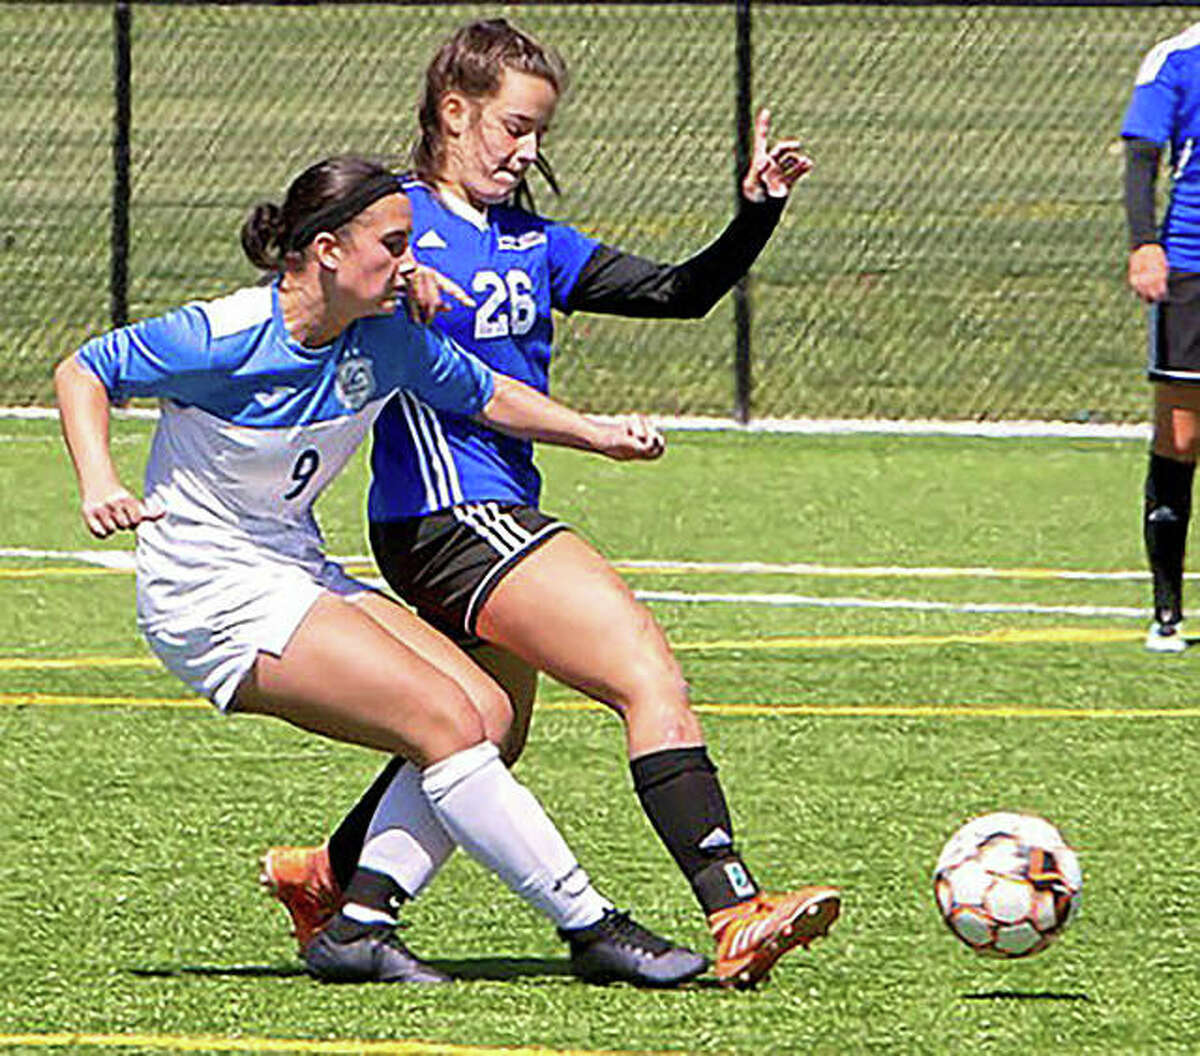 LCCC’s Paige Bauer, left, battles with an Eastern Florida State College players earlier this season. LCCC, which finished third at last season’s NJCAA National Tournament, was denied an at-large bid to this year’s tourney.